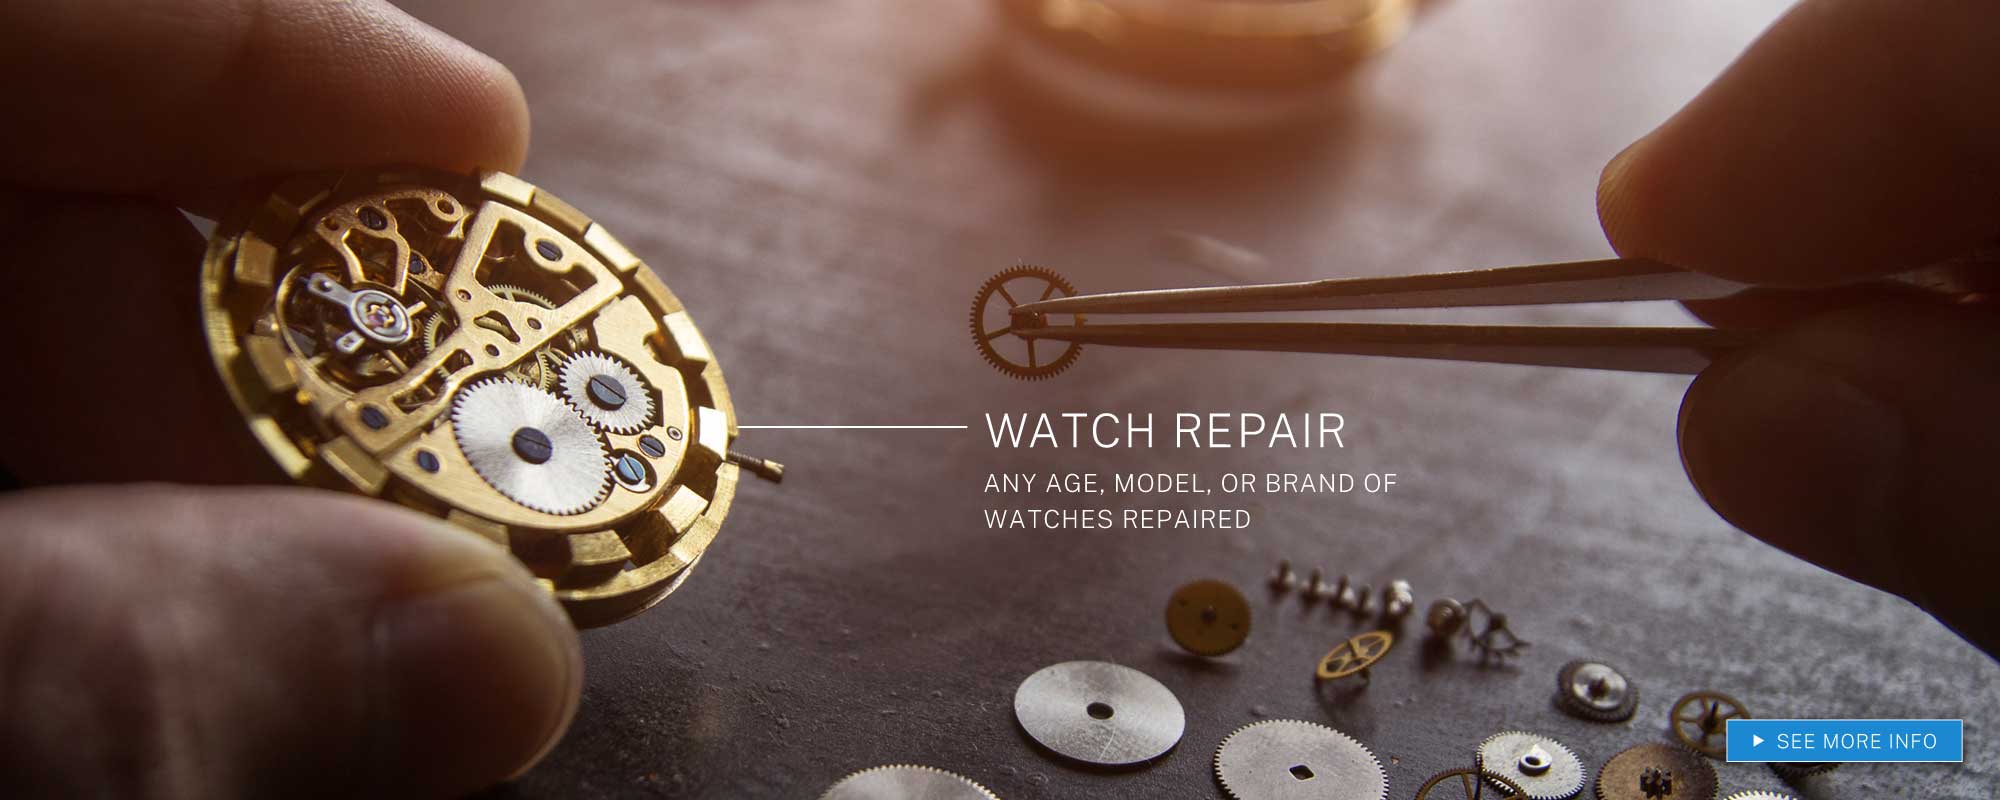 Watch Repair Service Available At Marks Jewelry Co. LLC